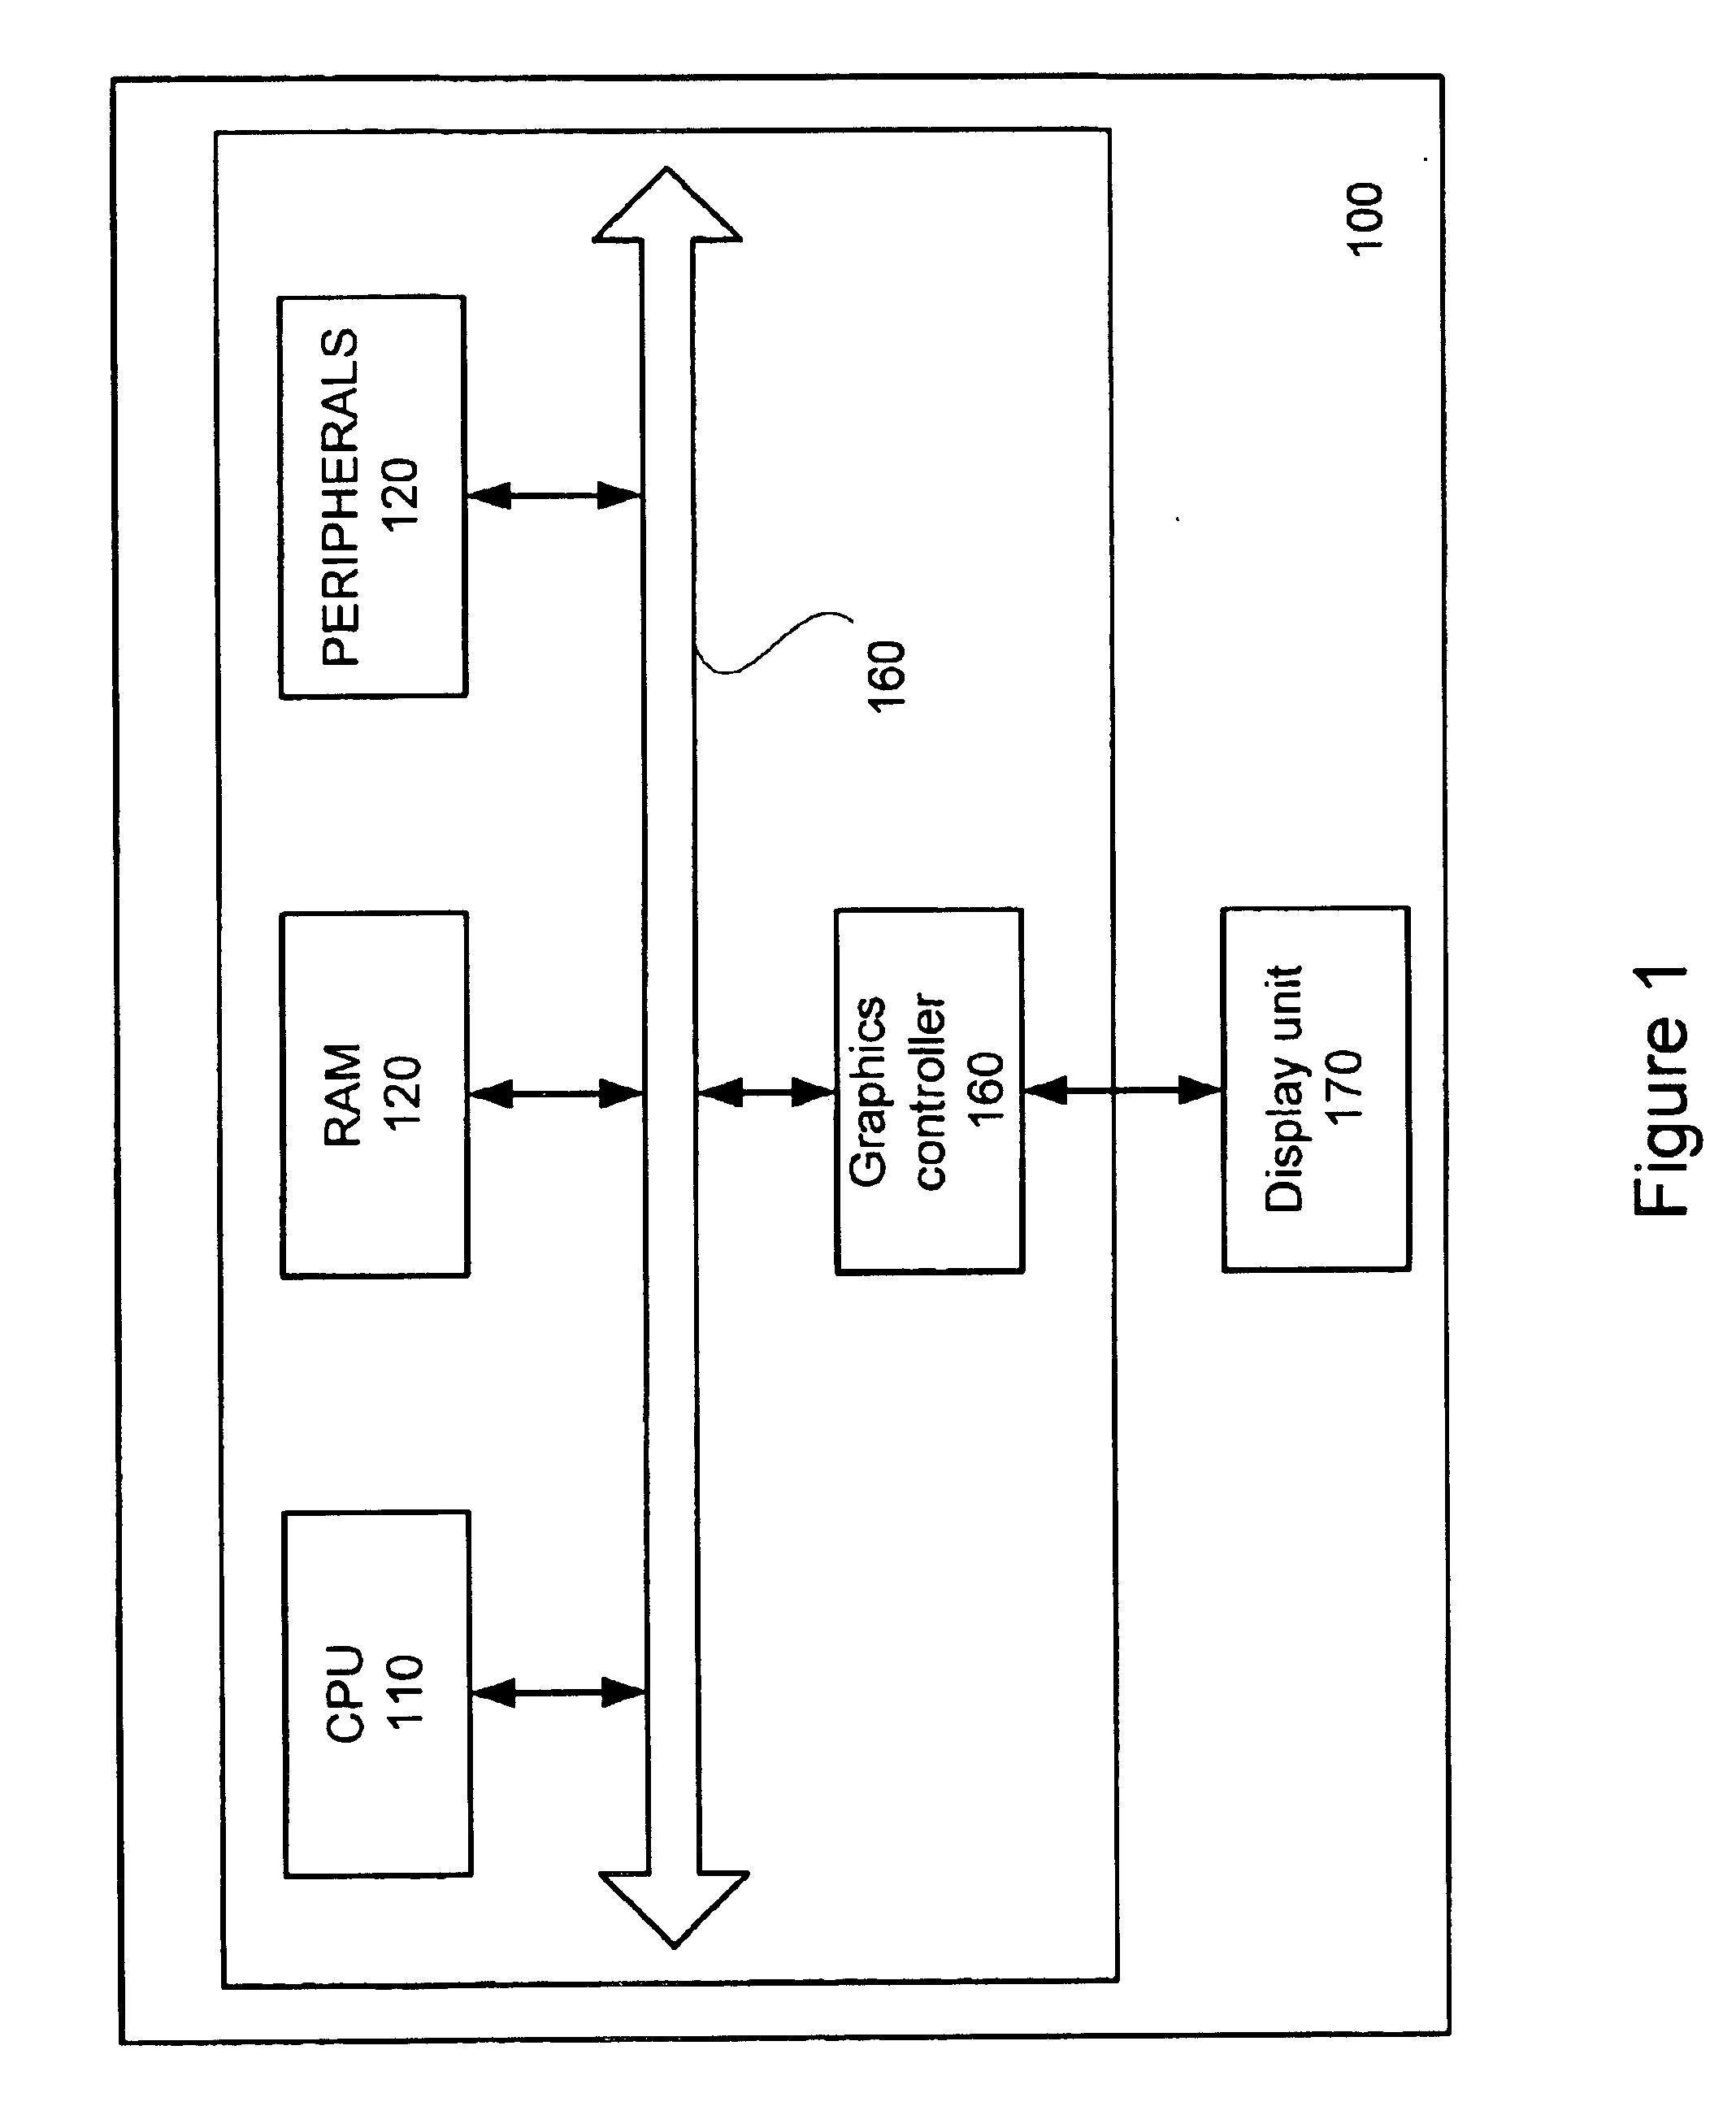 Display unit storing and using a cryptography key